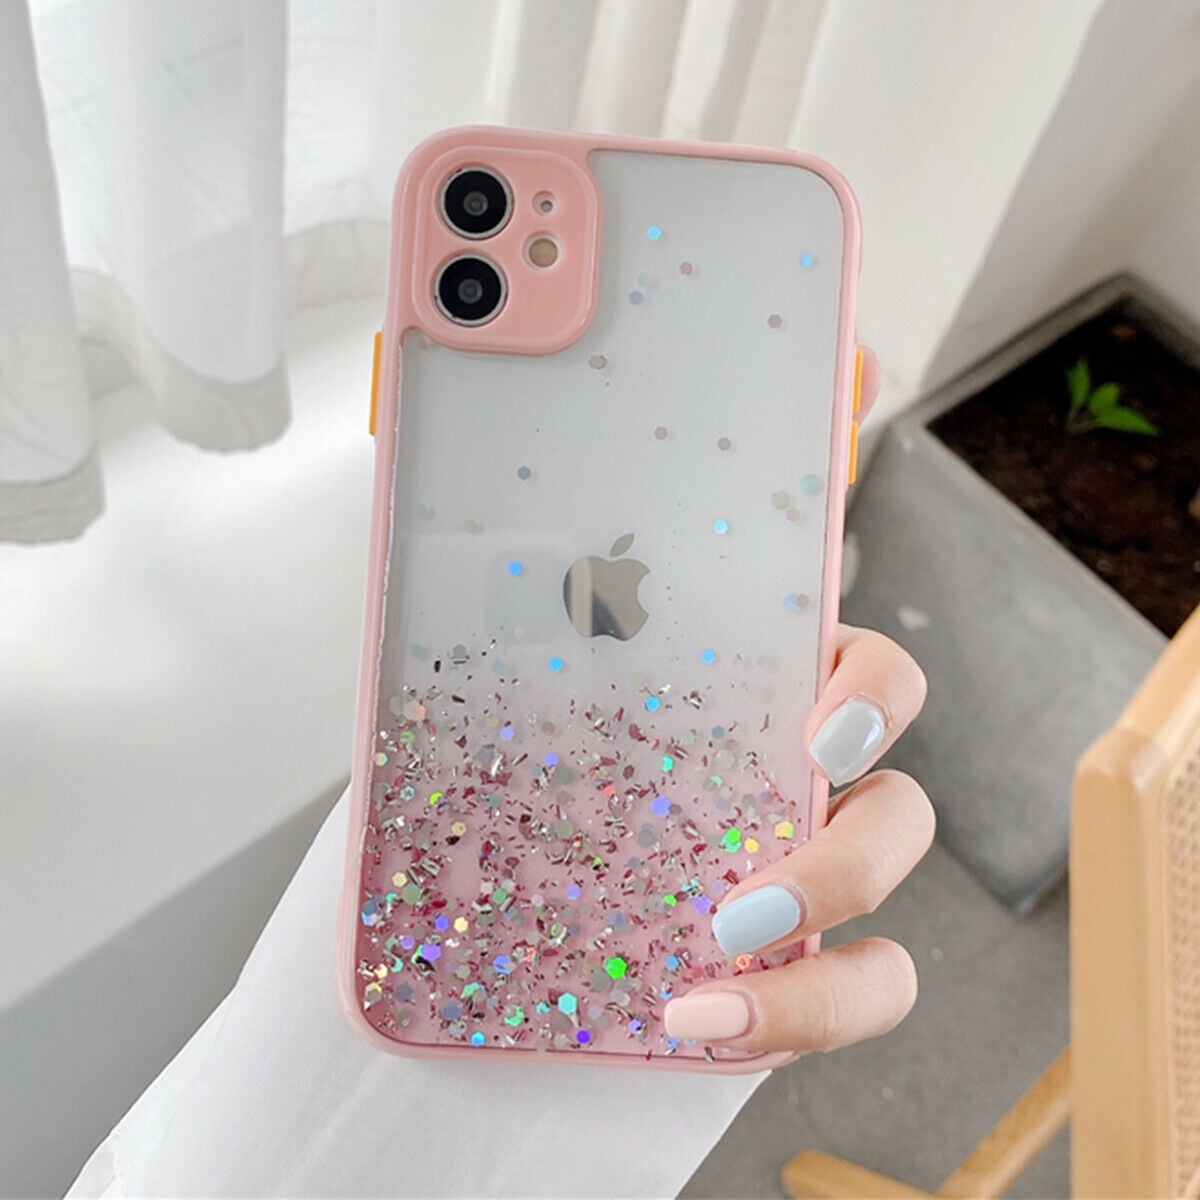 Bling Glitter Case For iPhone 7 Plus 8 XR XS Max Clear Gel Soft Phone Case Cover 